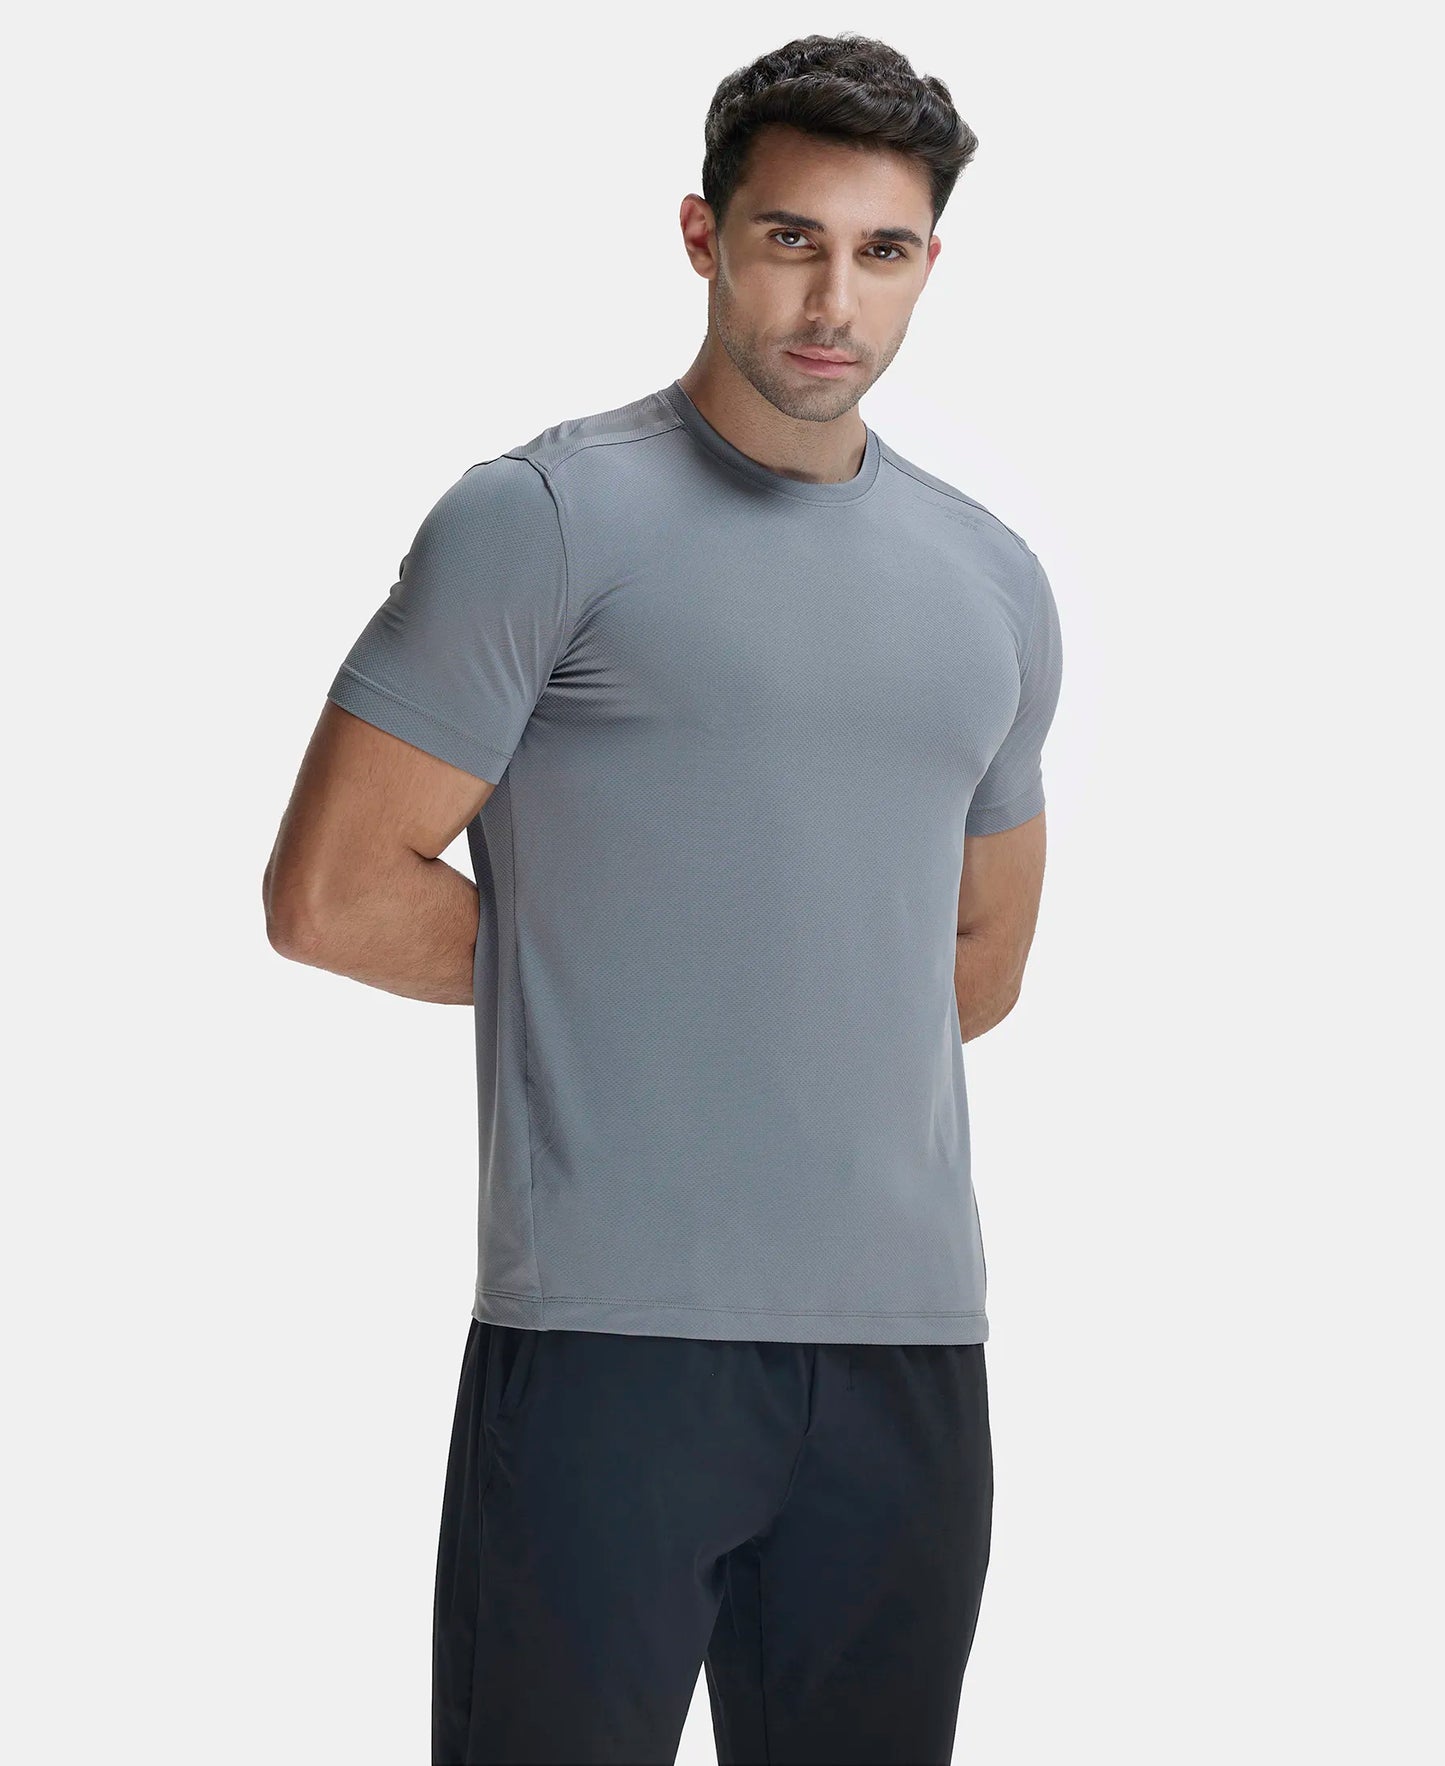 Recycled Microfiber Elastane Stretch Fabric Round Neck Half Sleeve Breathable Mesh T-Shirt - Quiet Shade-2